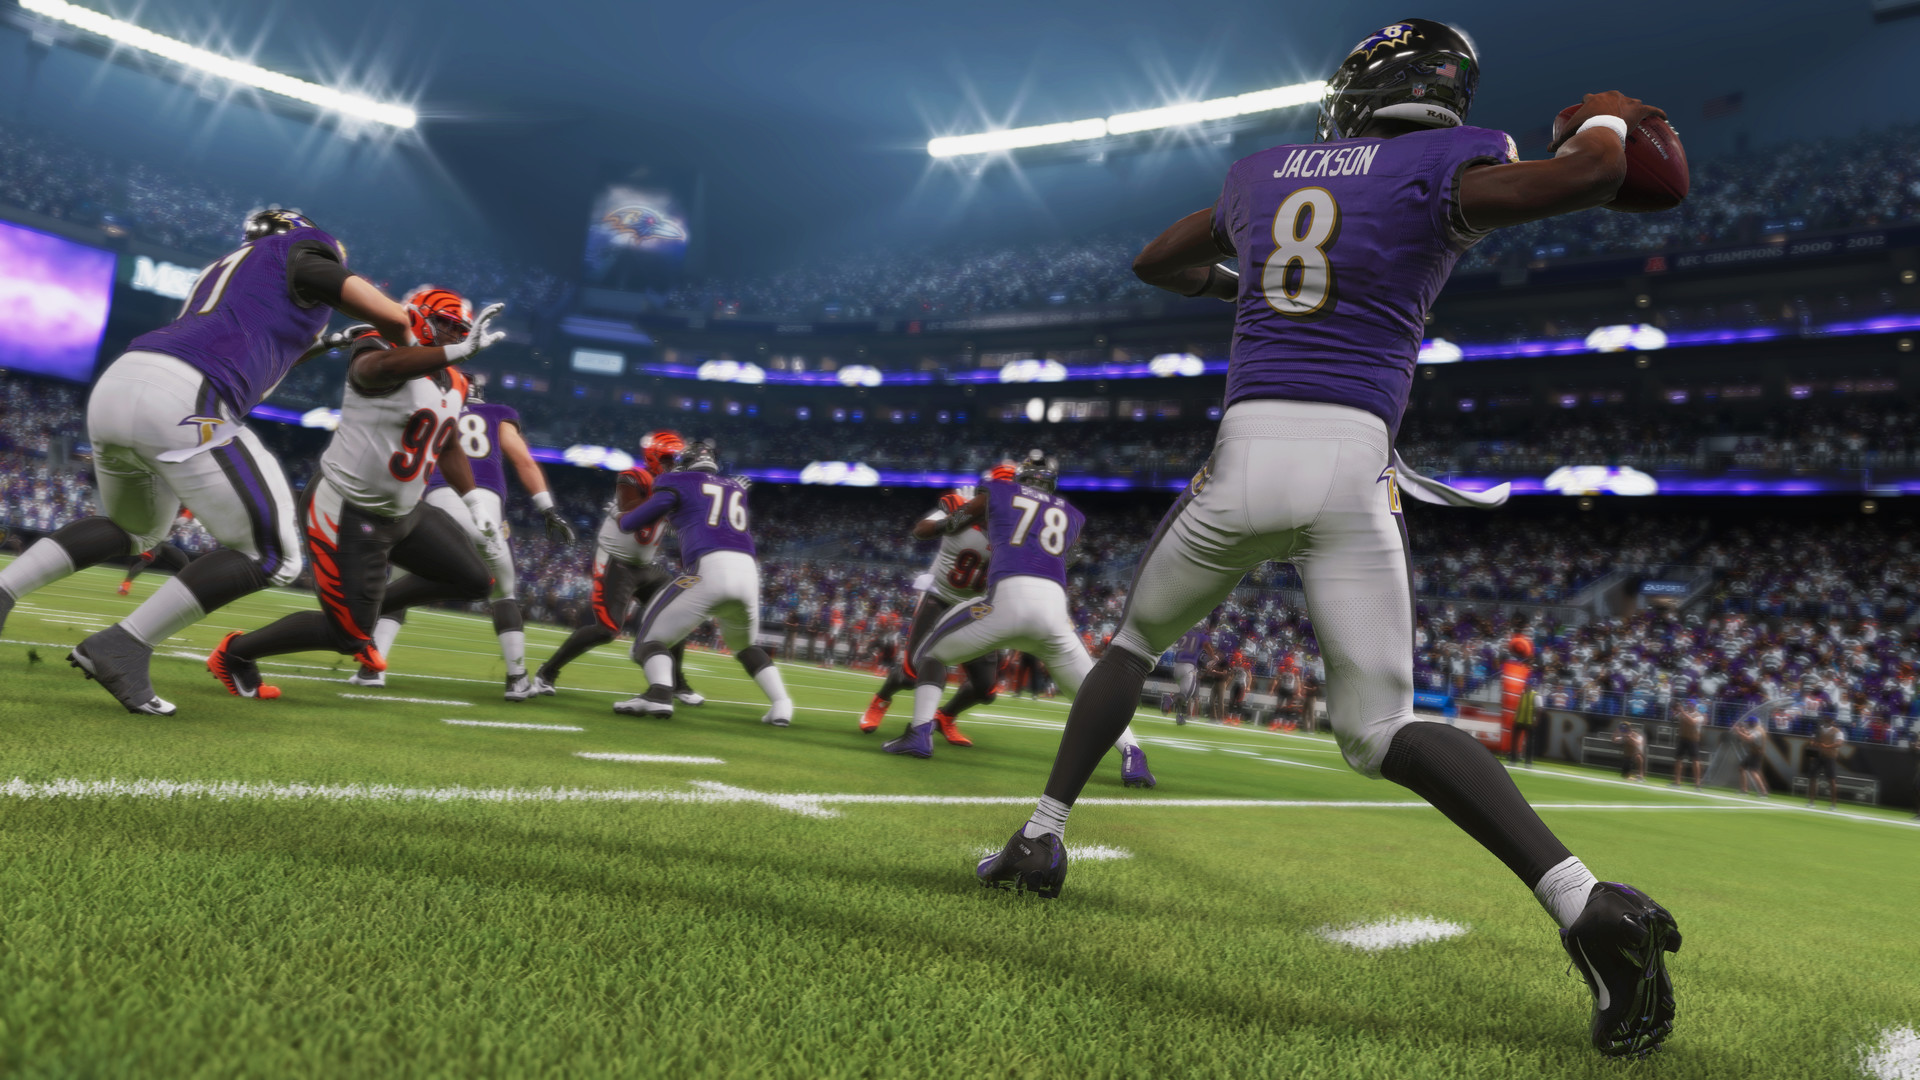 Find the best computers for Madden NFL 21